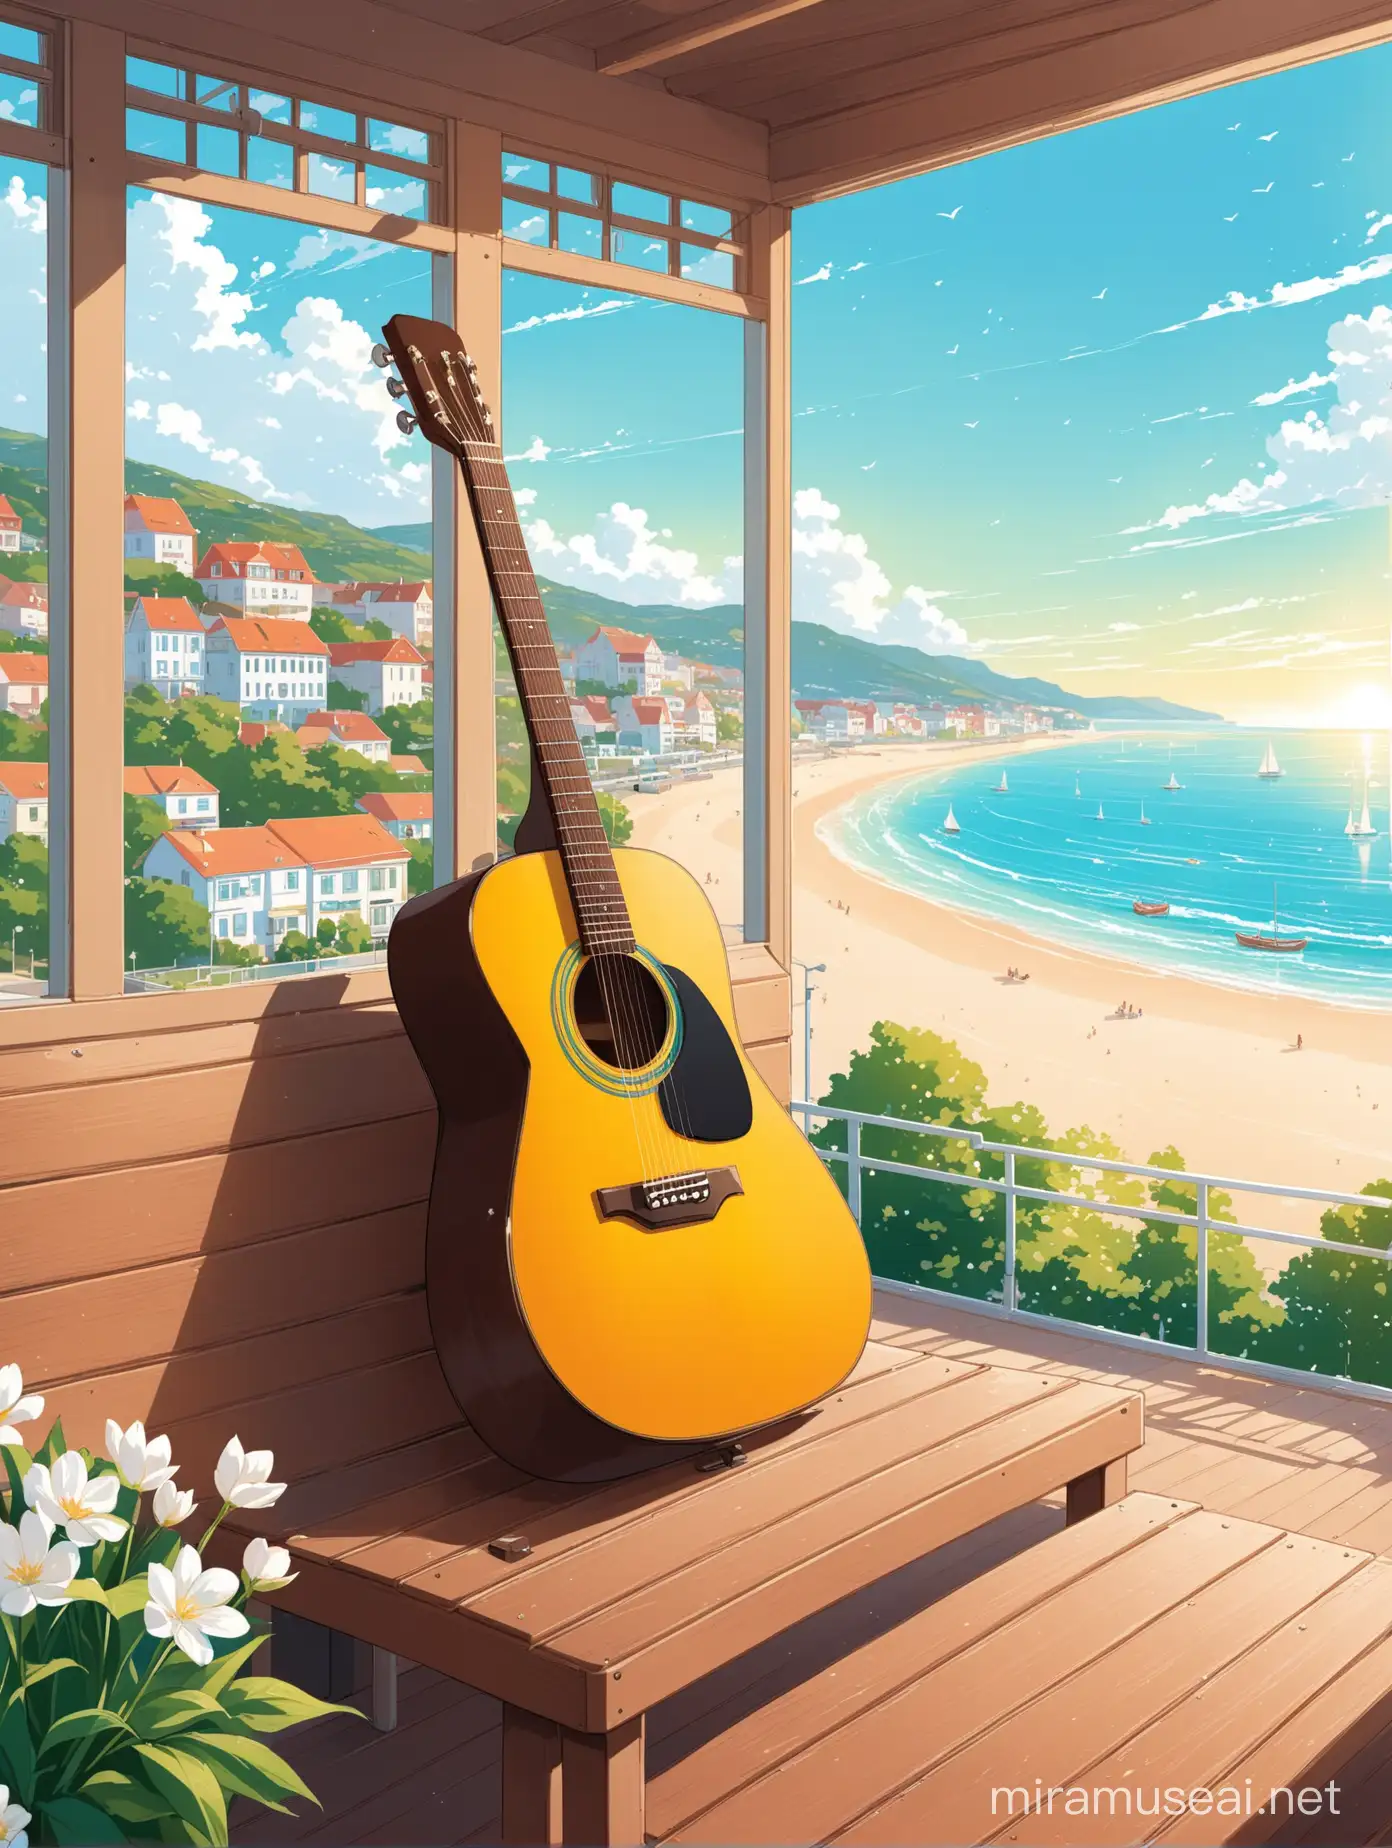 Springtime Guitar Concert by the Seaside